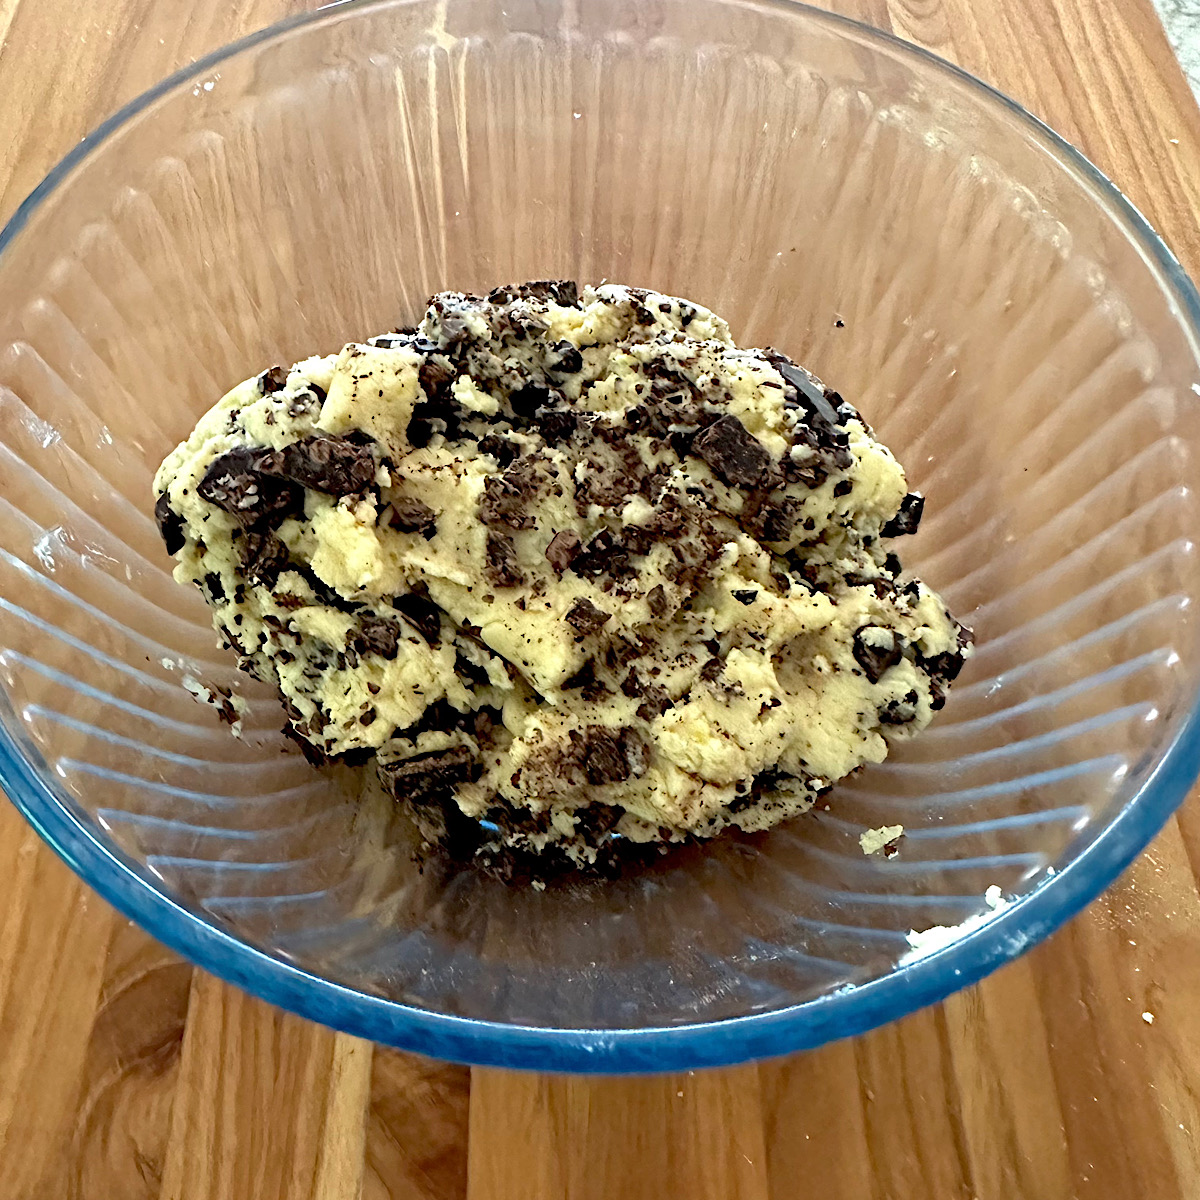 Cookie dough with chocolate bits worked into it.